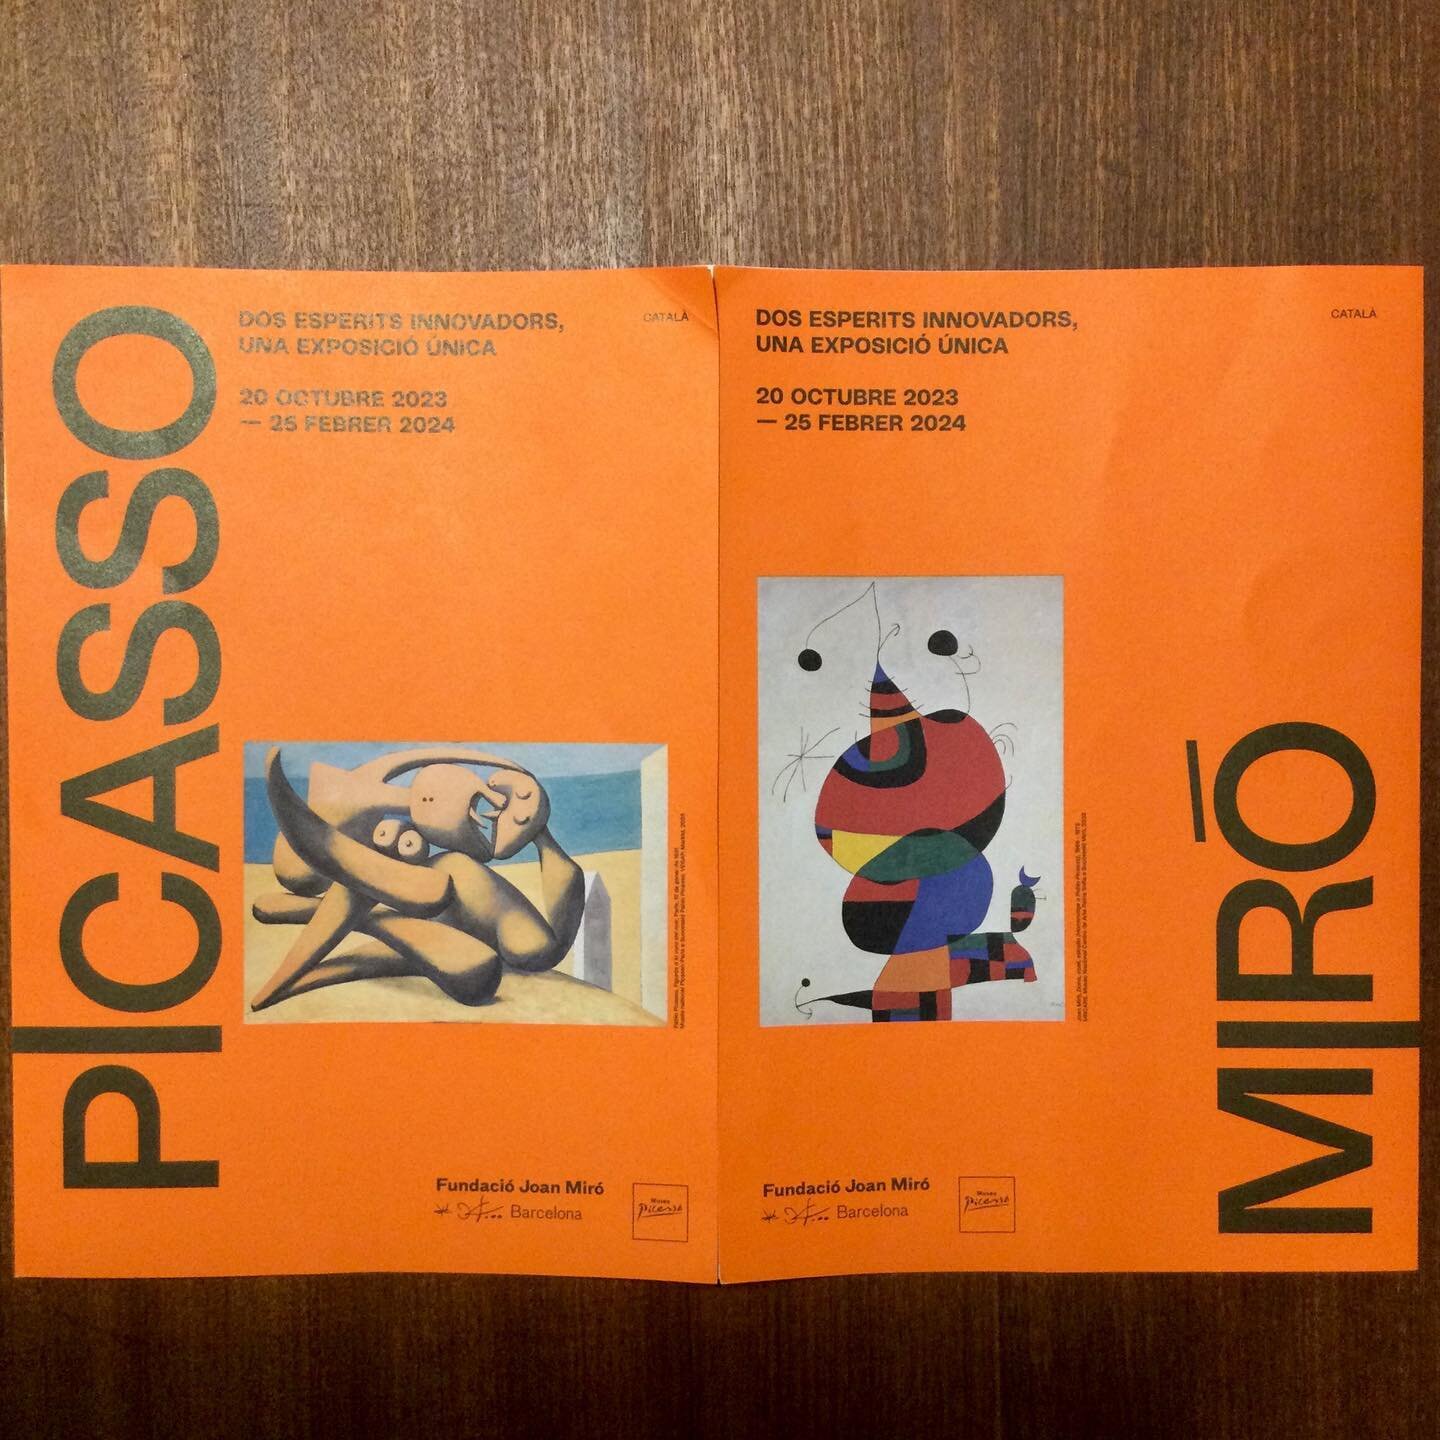 The shadow of Picasso is ever present in Barcelona. However, this exhibition at the Joan Mir&oacute; Foundation (which is one of the most beautiful and peaceful view spots of my city) is a intimate portrait of his relationship with painter Joan Mir&o